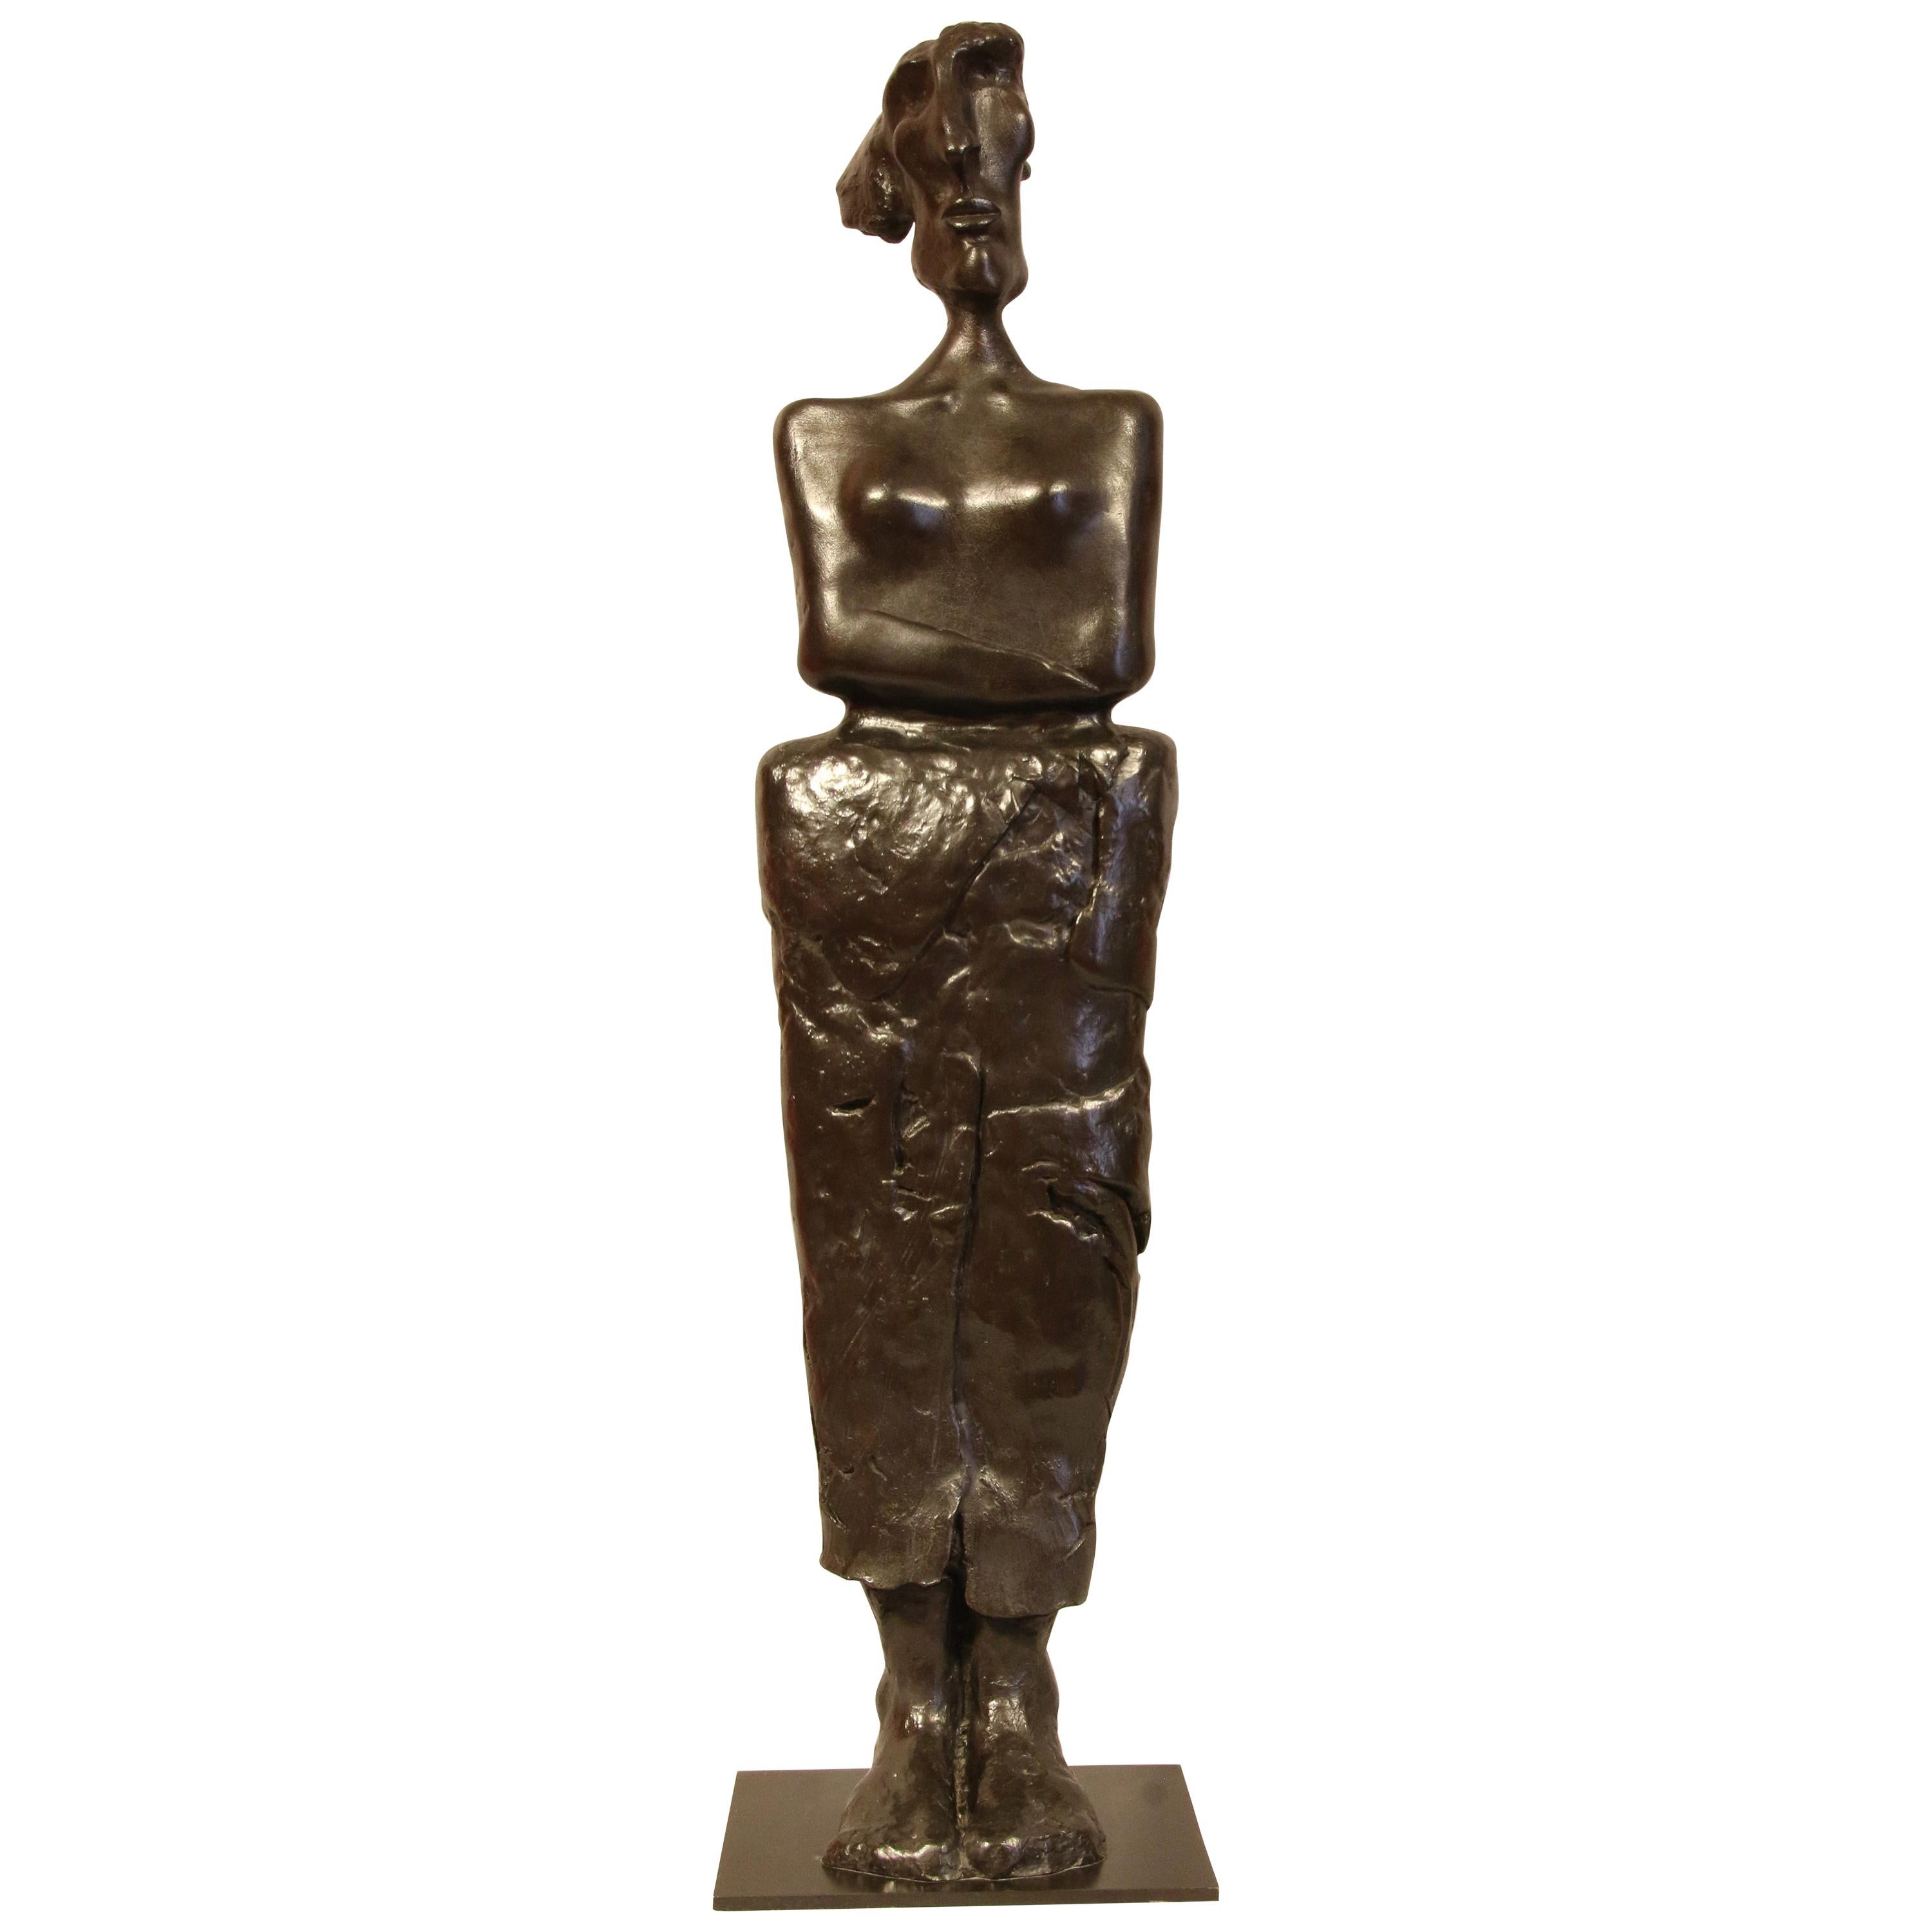 Bronze Sculpture "Chained woman" 2000, by Jacques Tenenhaus For Sale